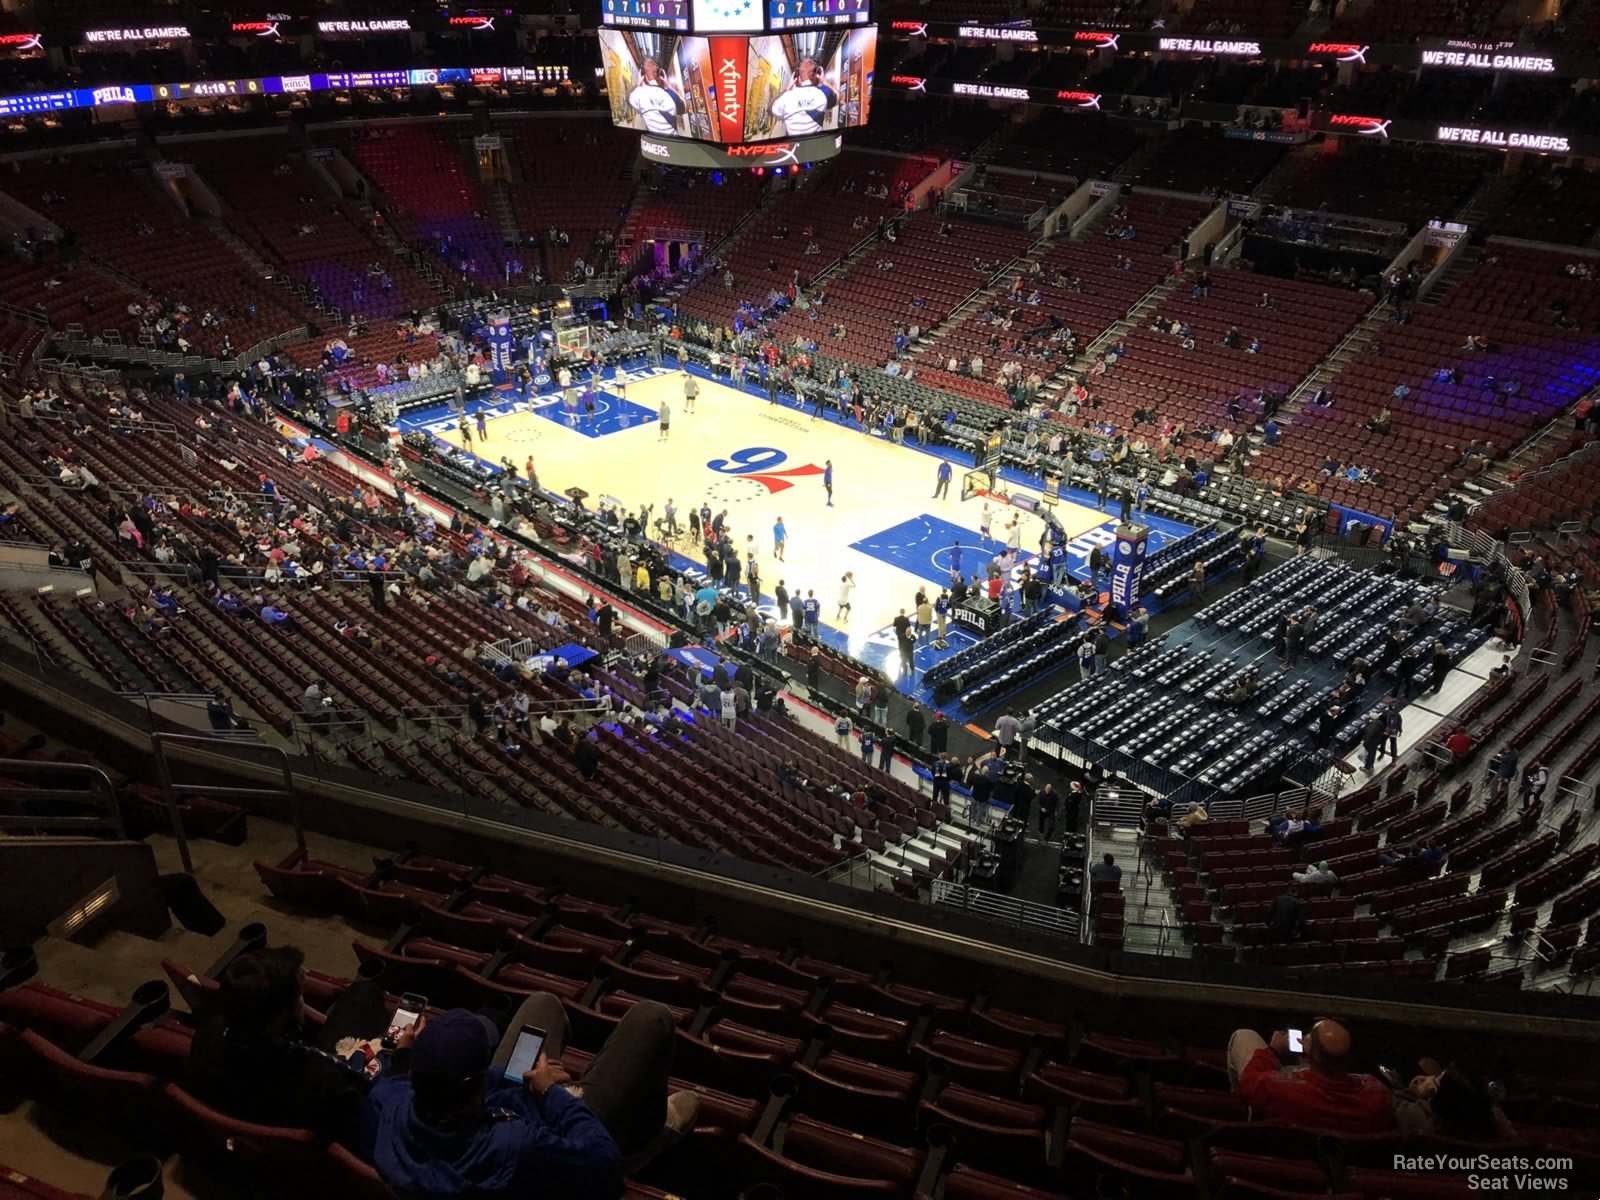 section 204a, row 7 seat view  for basketball - wells fargo center